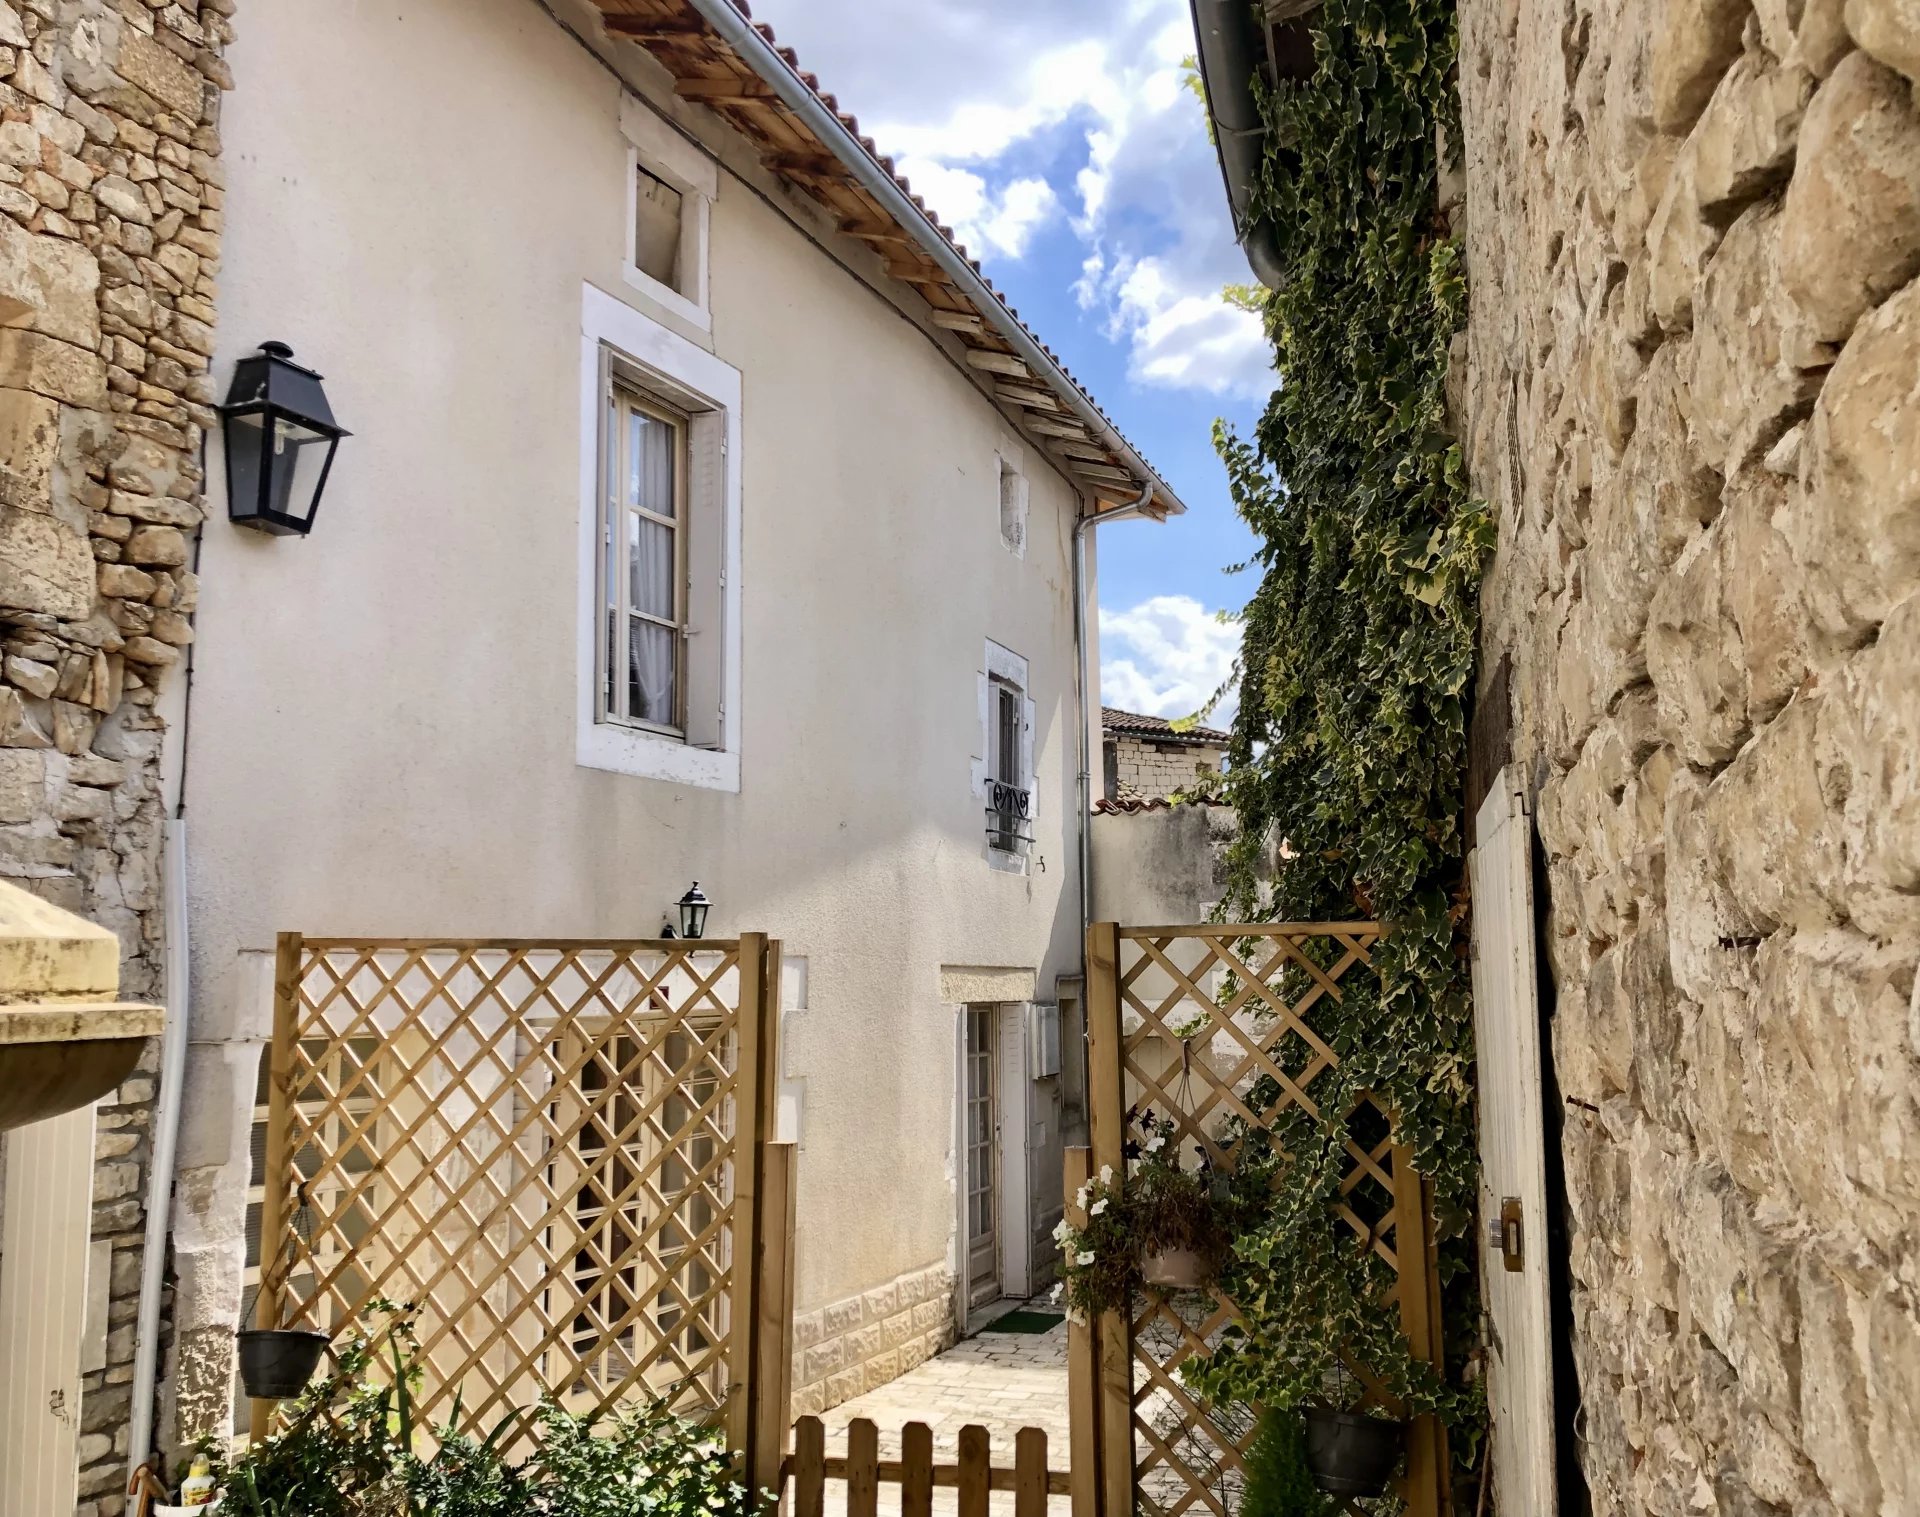 2 bed home in one of the prettiest villages in France, walking distance of shops/restaurants